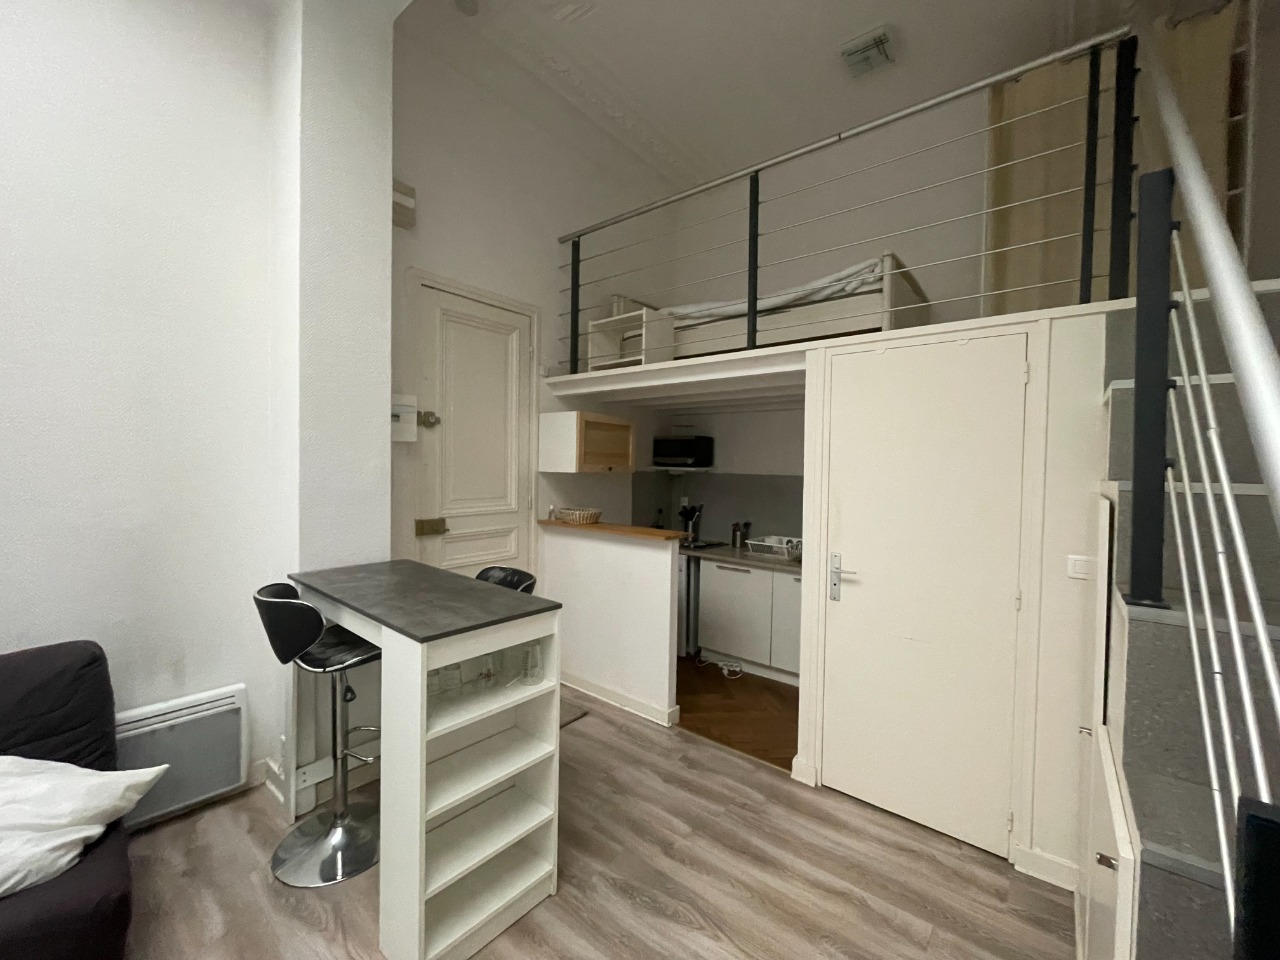 Grand studio   cour rue nationale Photo 4 - JLW Immobilier